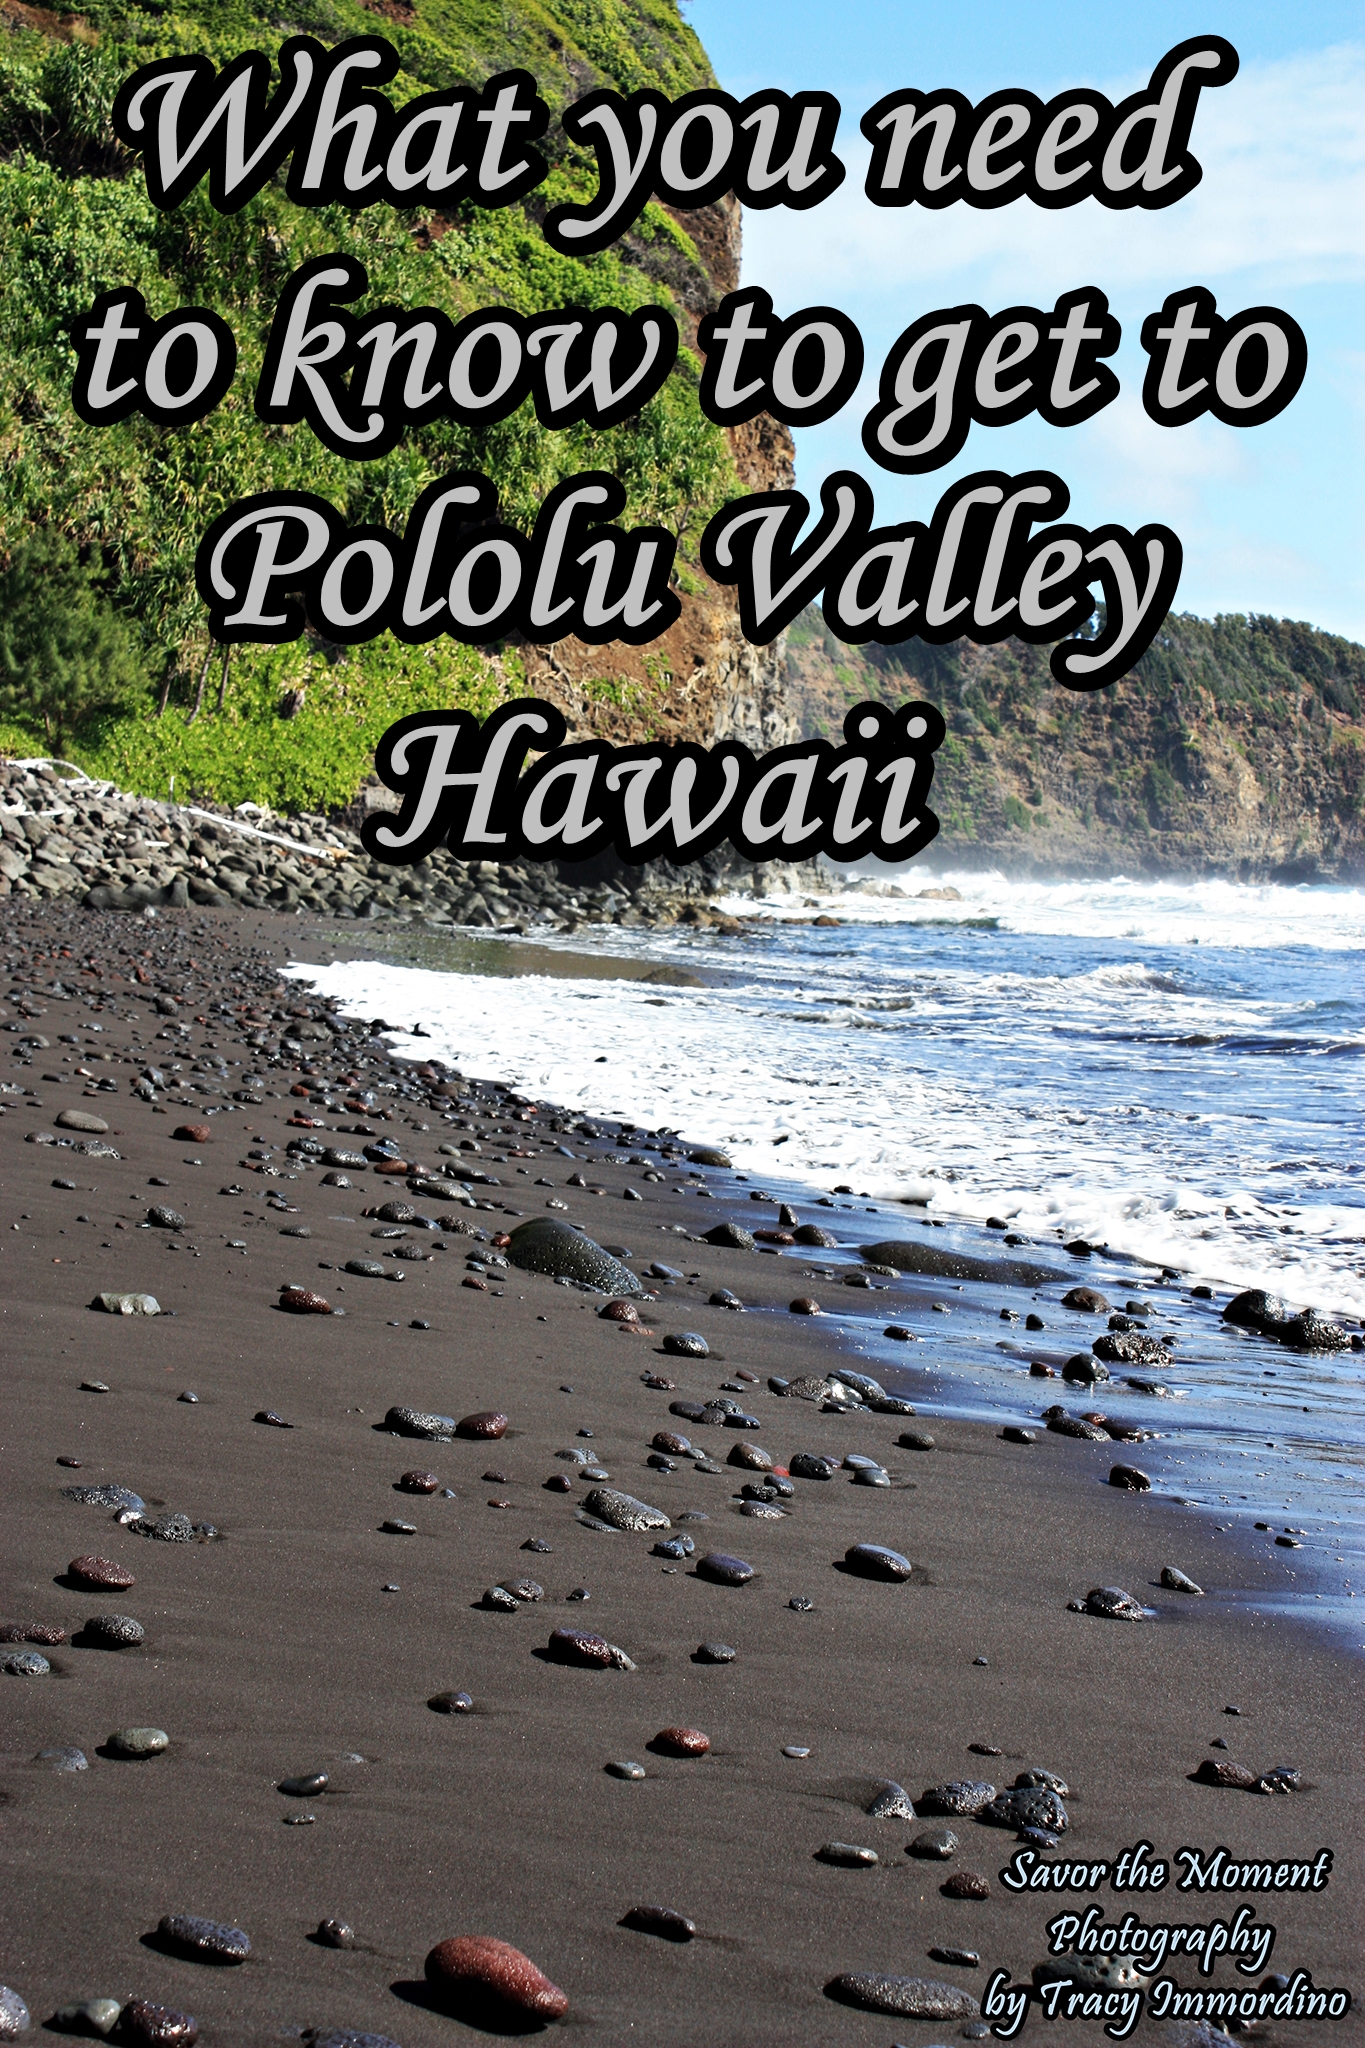 What you need to know to get to Pololu Valley, Hawaii